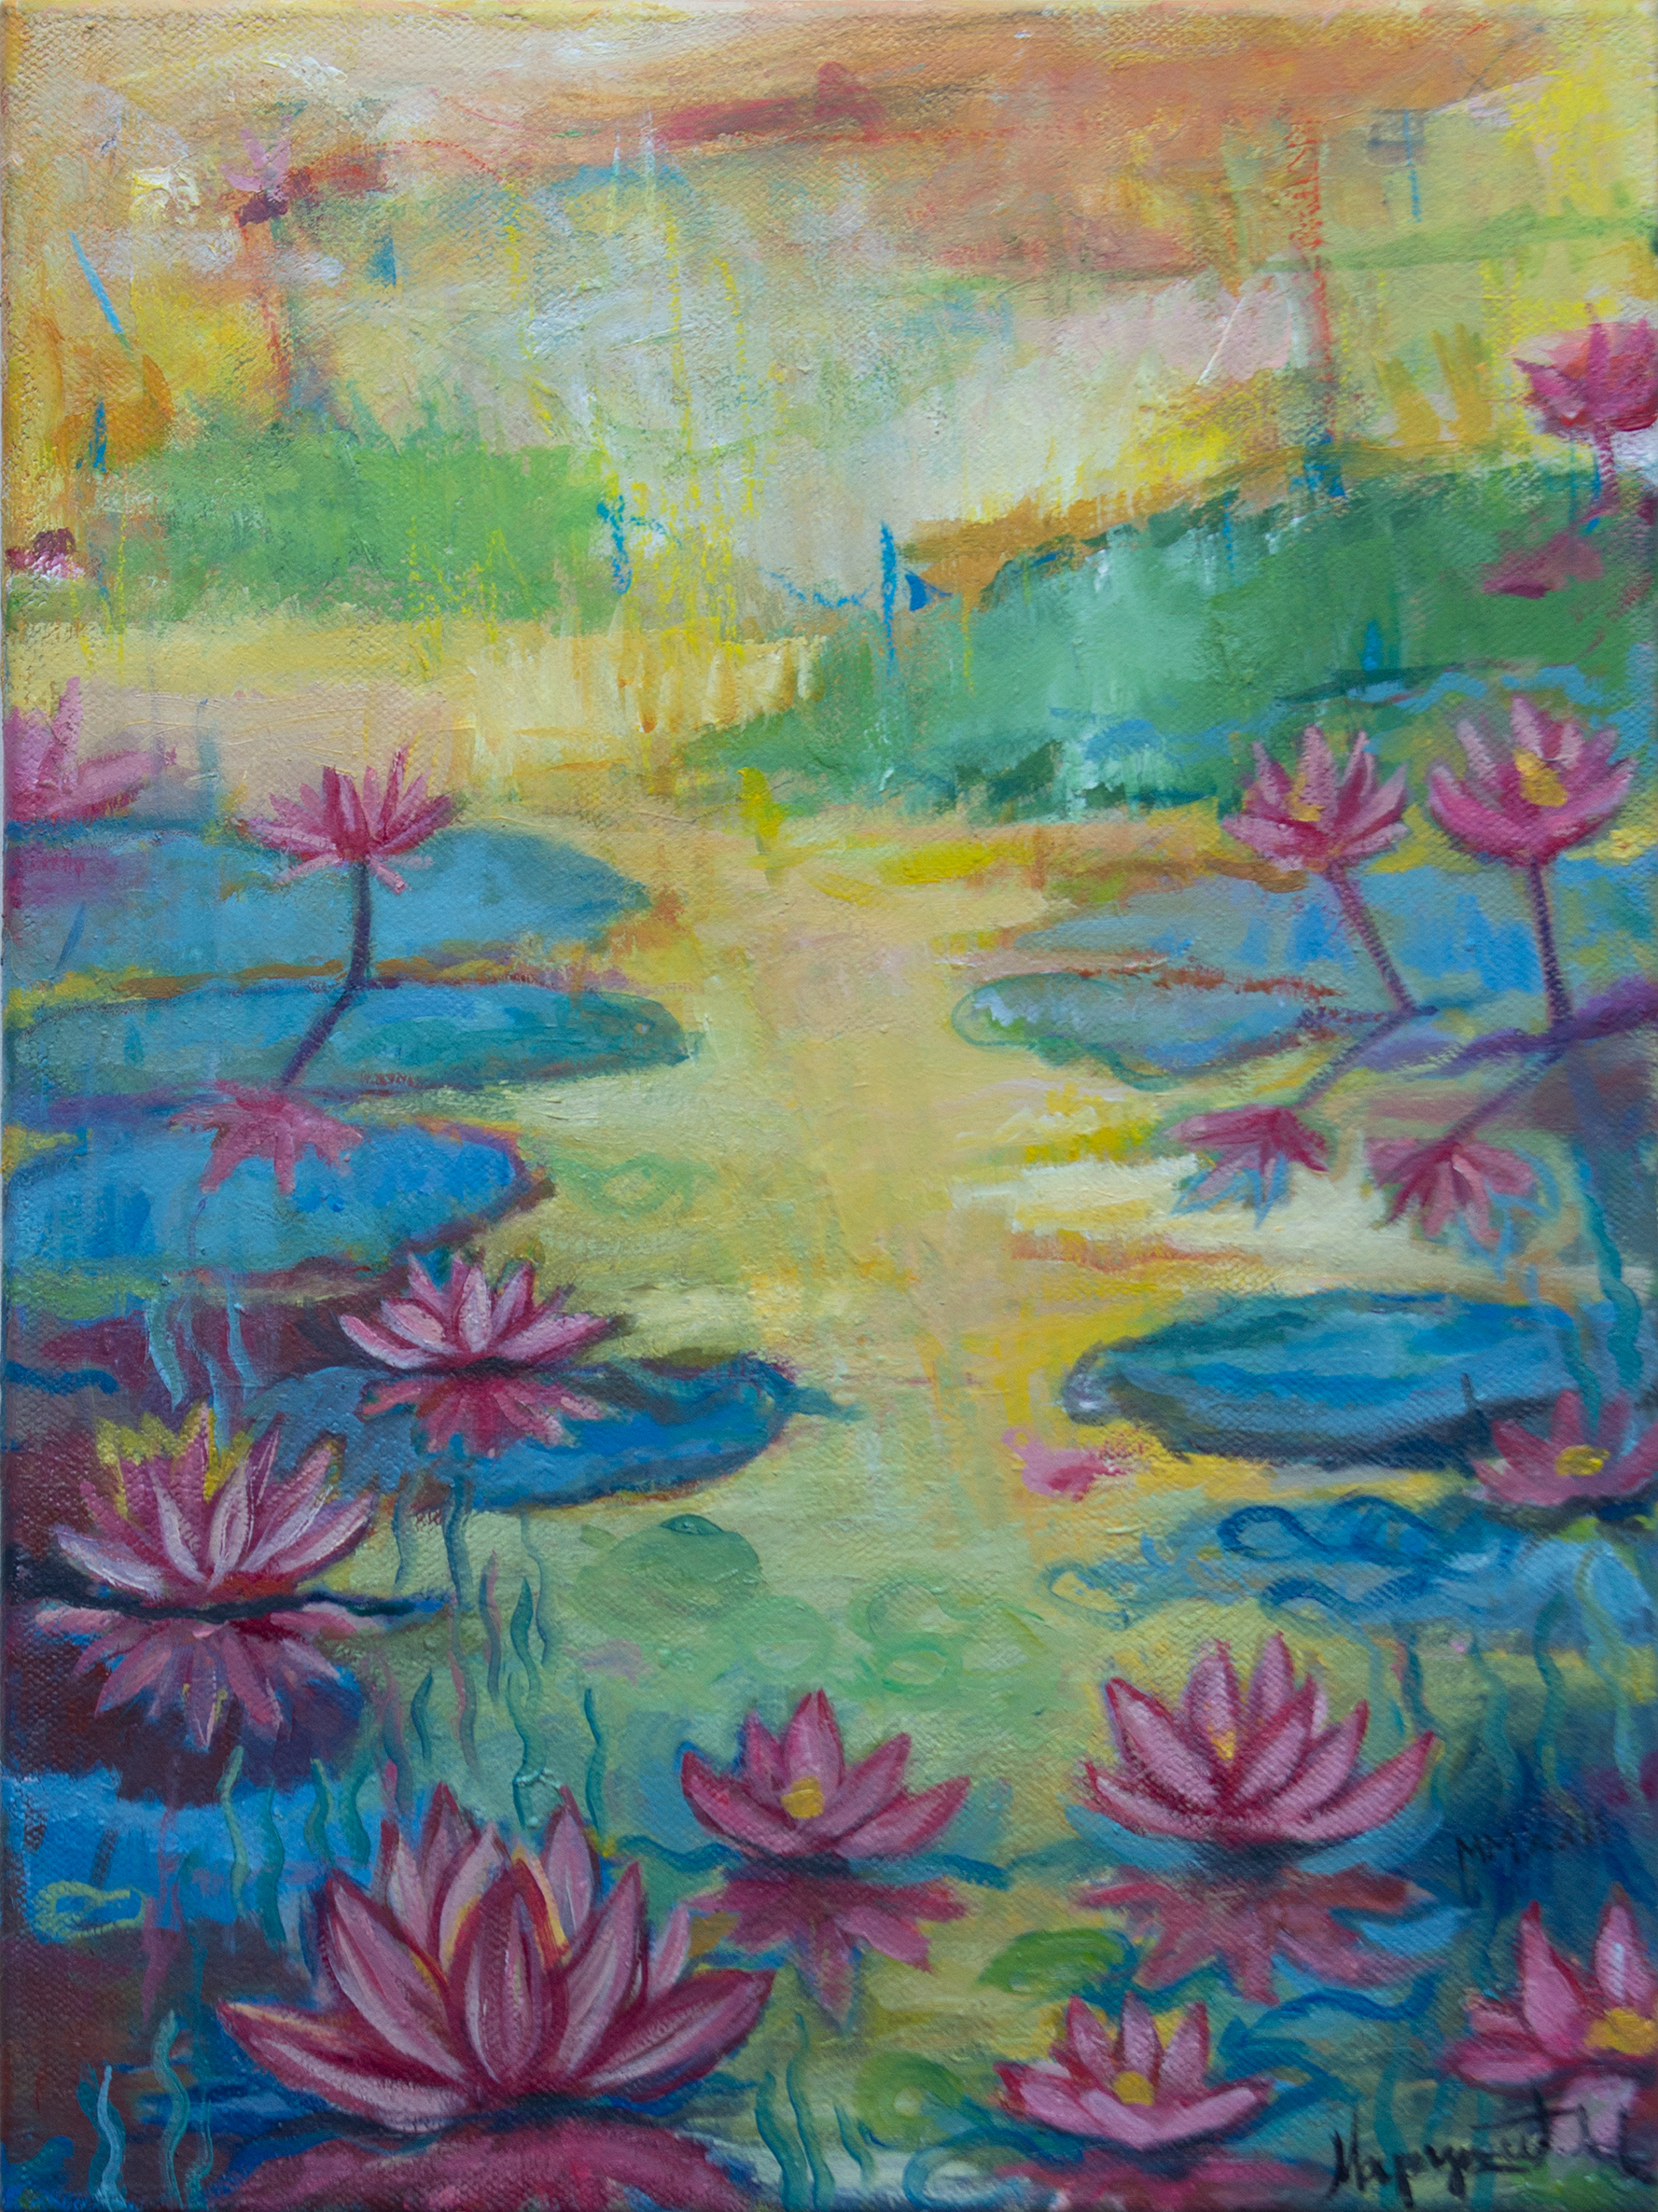 Water Lilies - Oil Painting on Canvas - 40x30cm Original Artwork by artist Milica MARUSIC